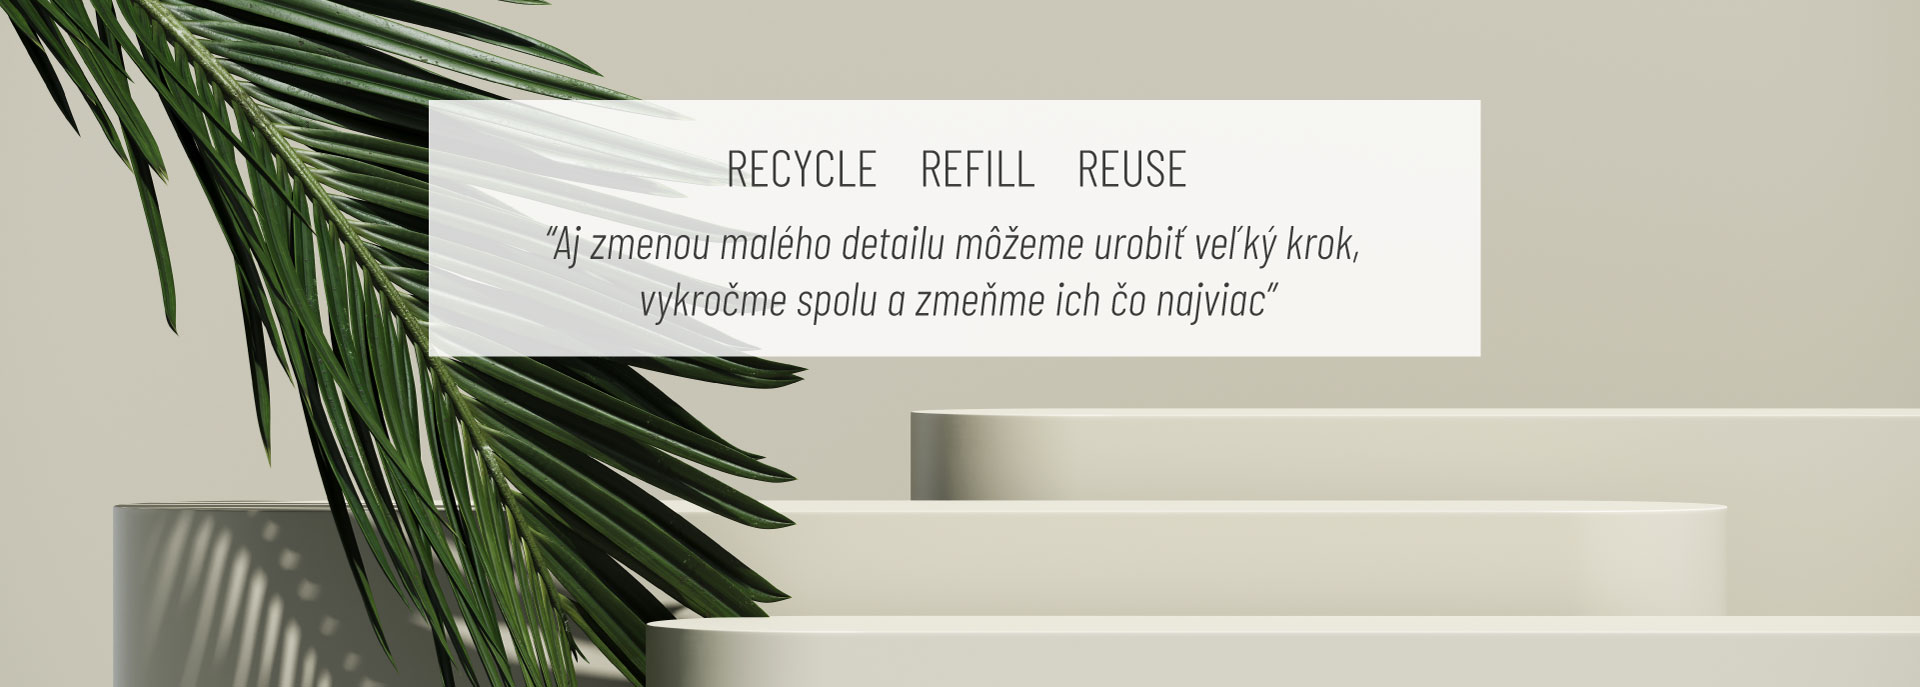 RECYCLE    REFILL    REUSE